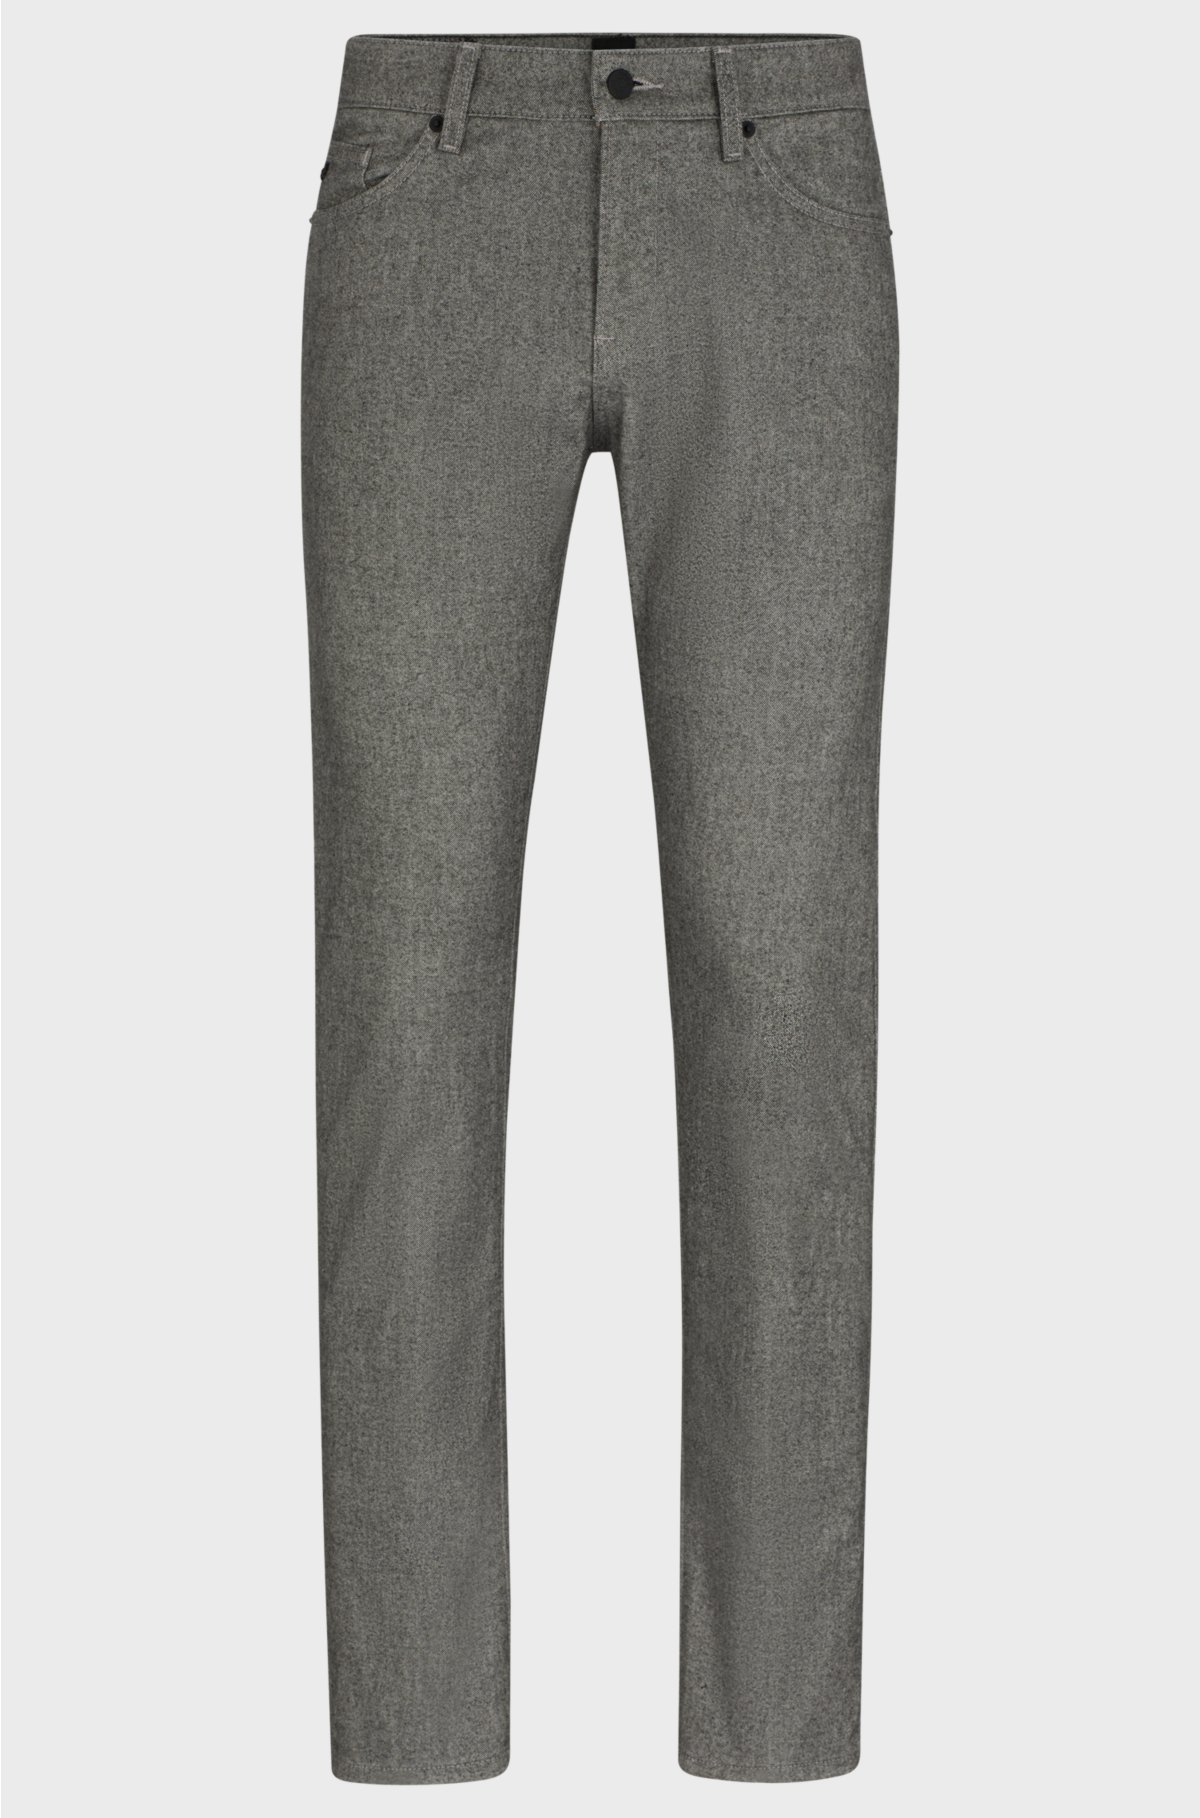 Slim-fit jeans in two-tone brushed twill, Grey